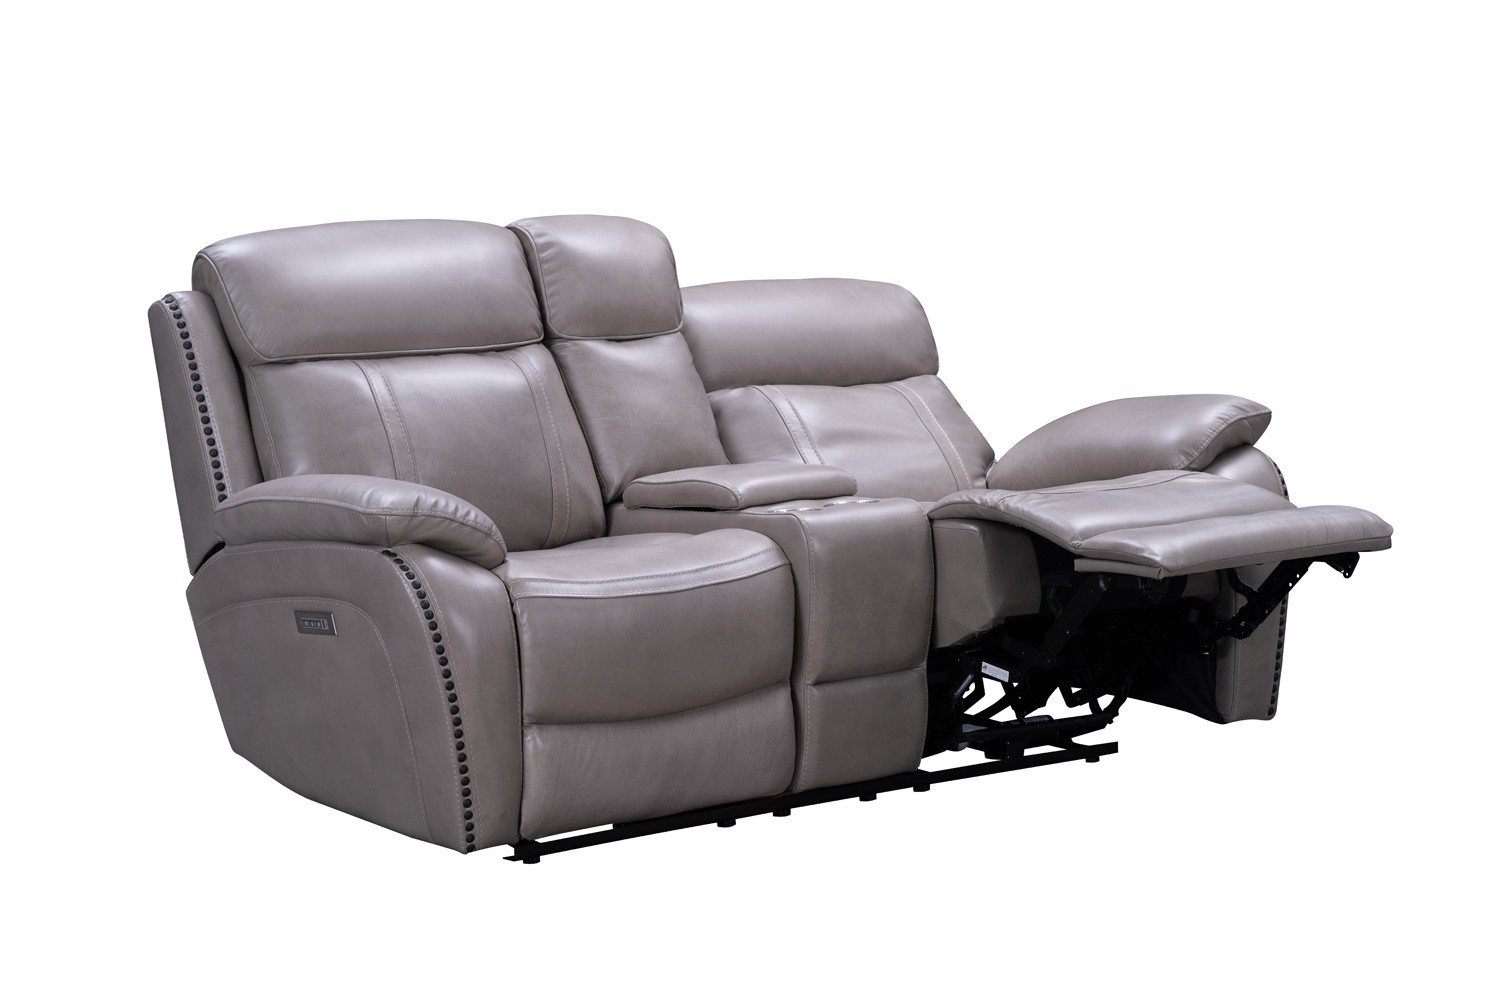 Barcalounger Sandover Power Reclining Console Loveseat with Power Head Rests and Lumbar - Sergi Gray Beige/Leather Match